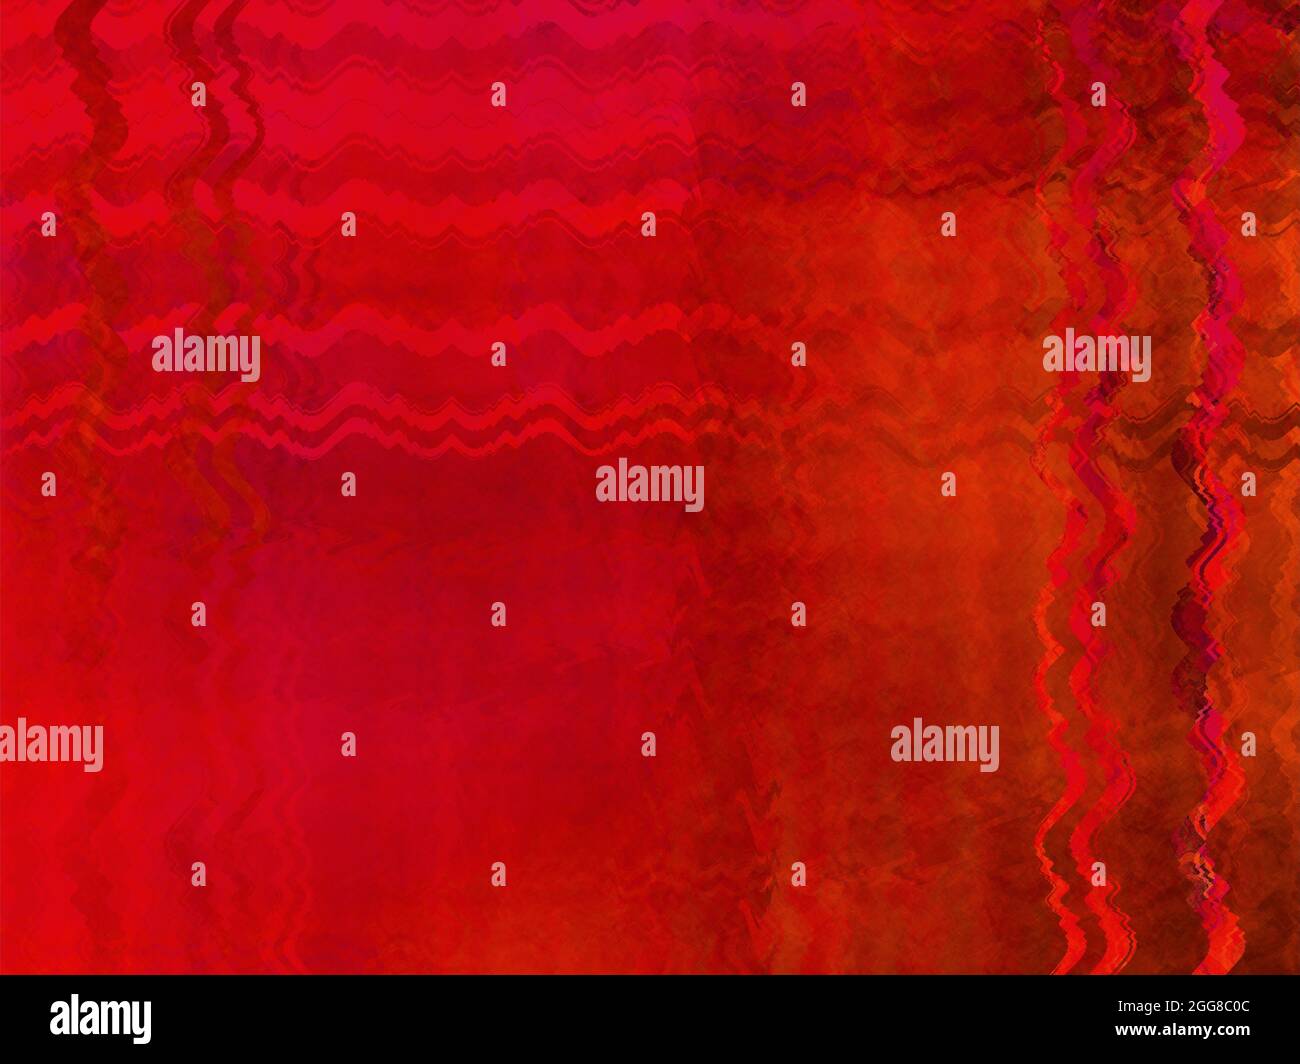 Red Background - Metallic Foil Wave Texture Stock Photo